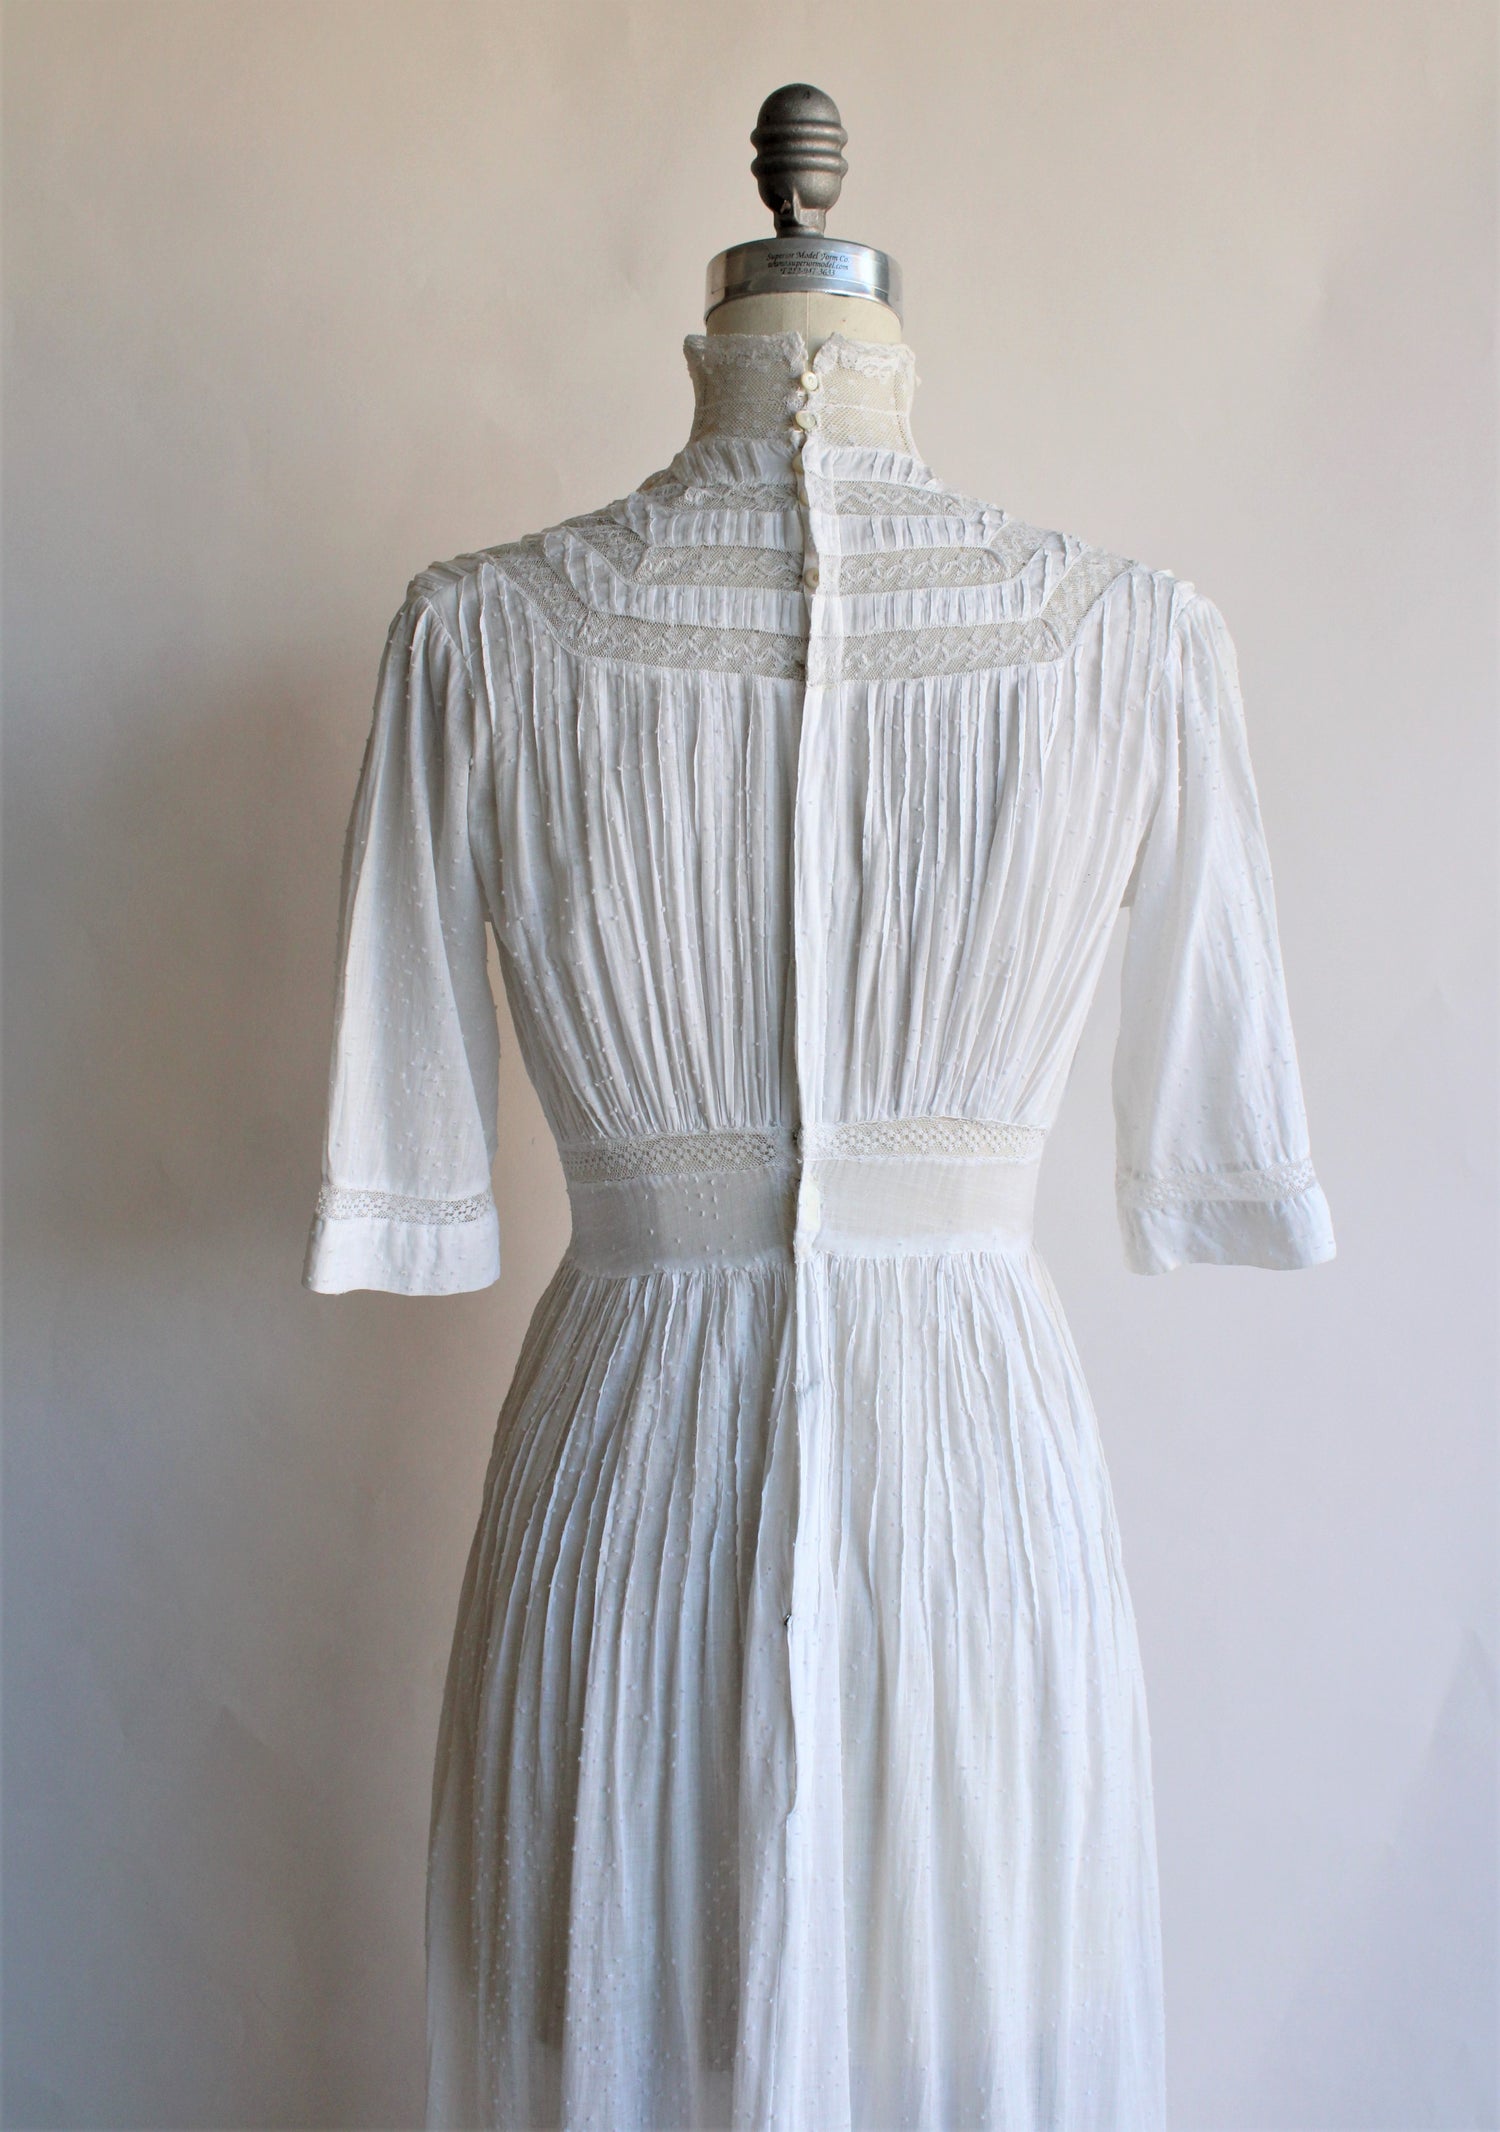 Antique Edwardian White Dress In Cotton and Lace – Toadstool Farm